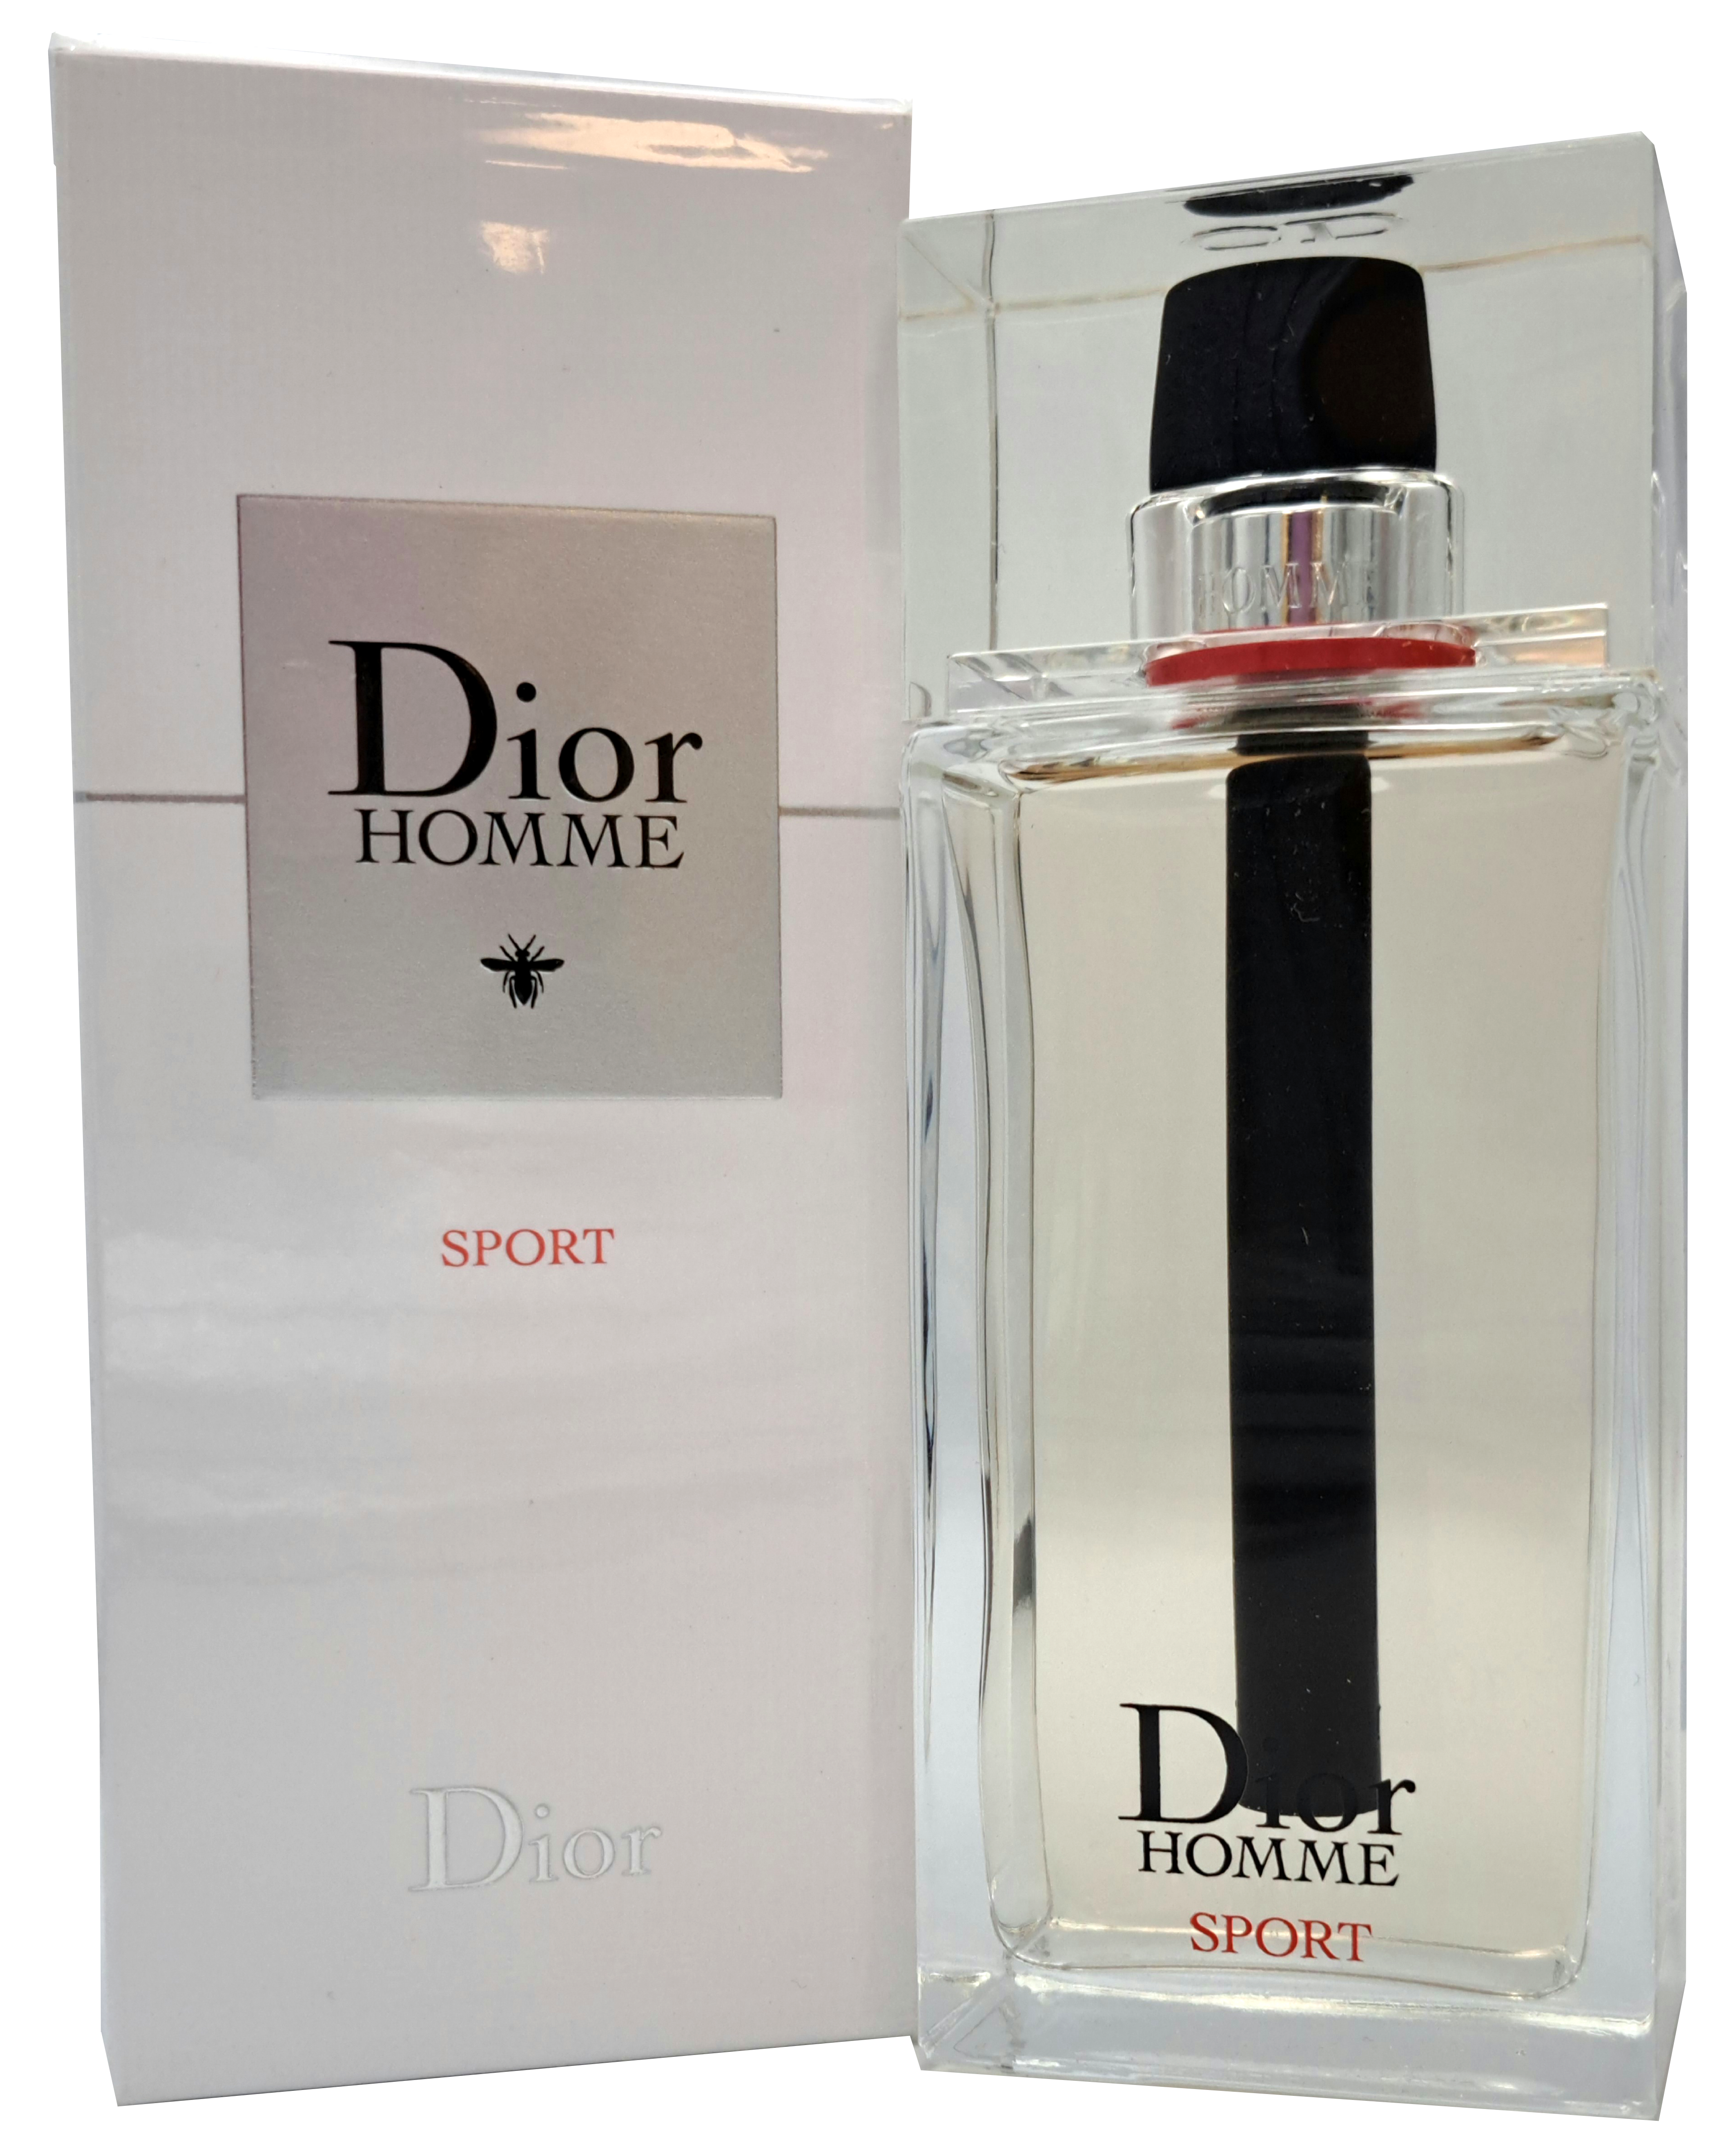 Quick Fragrance Review: Dior Homme Sport 2017 